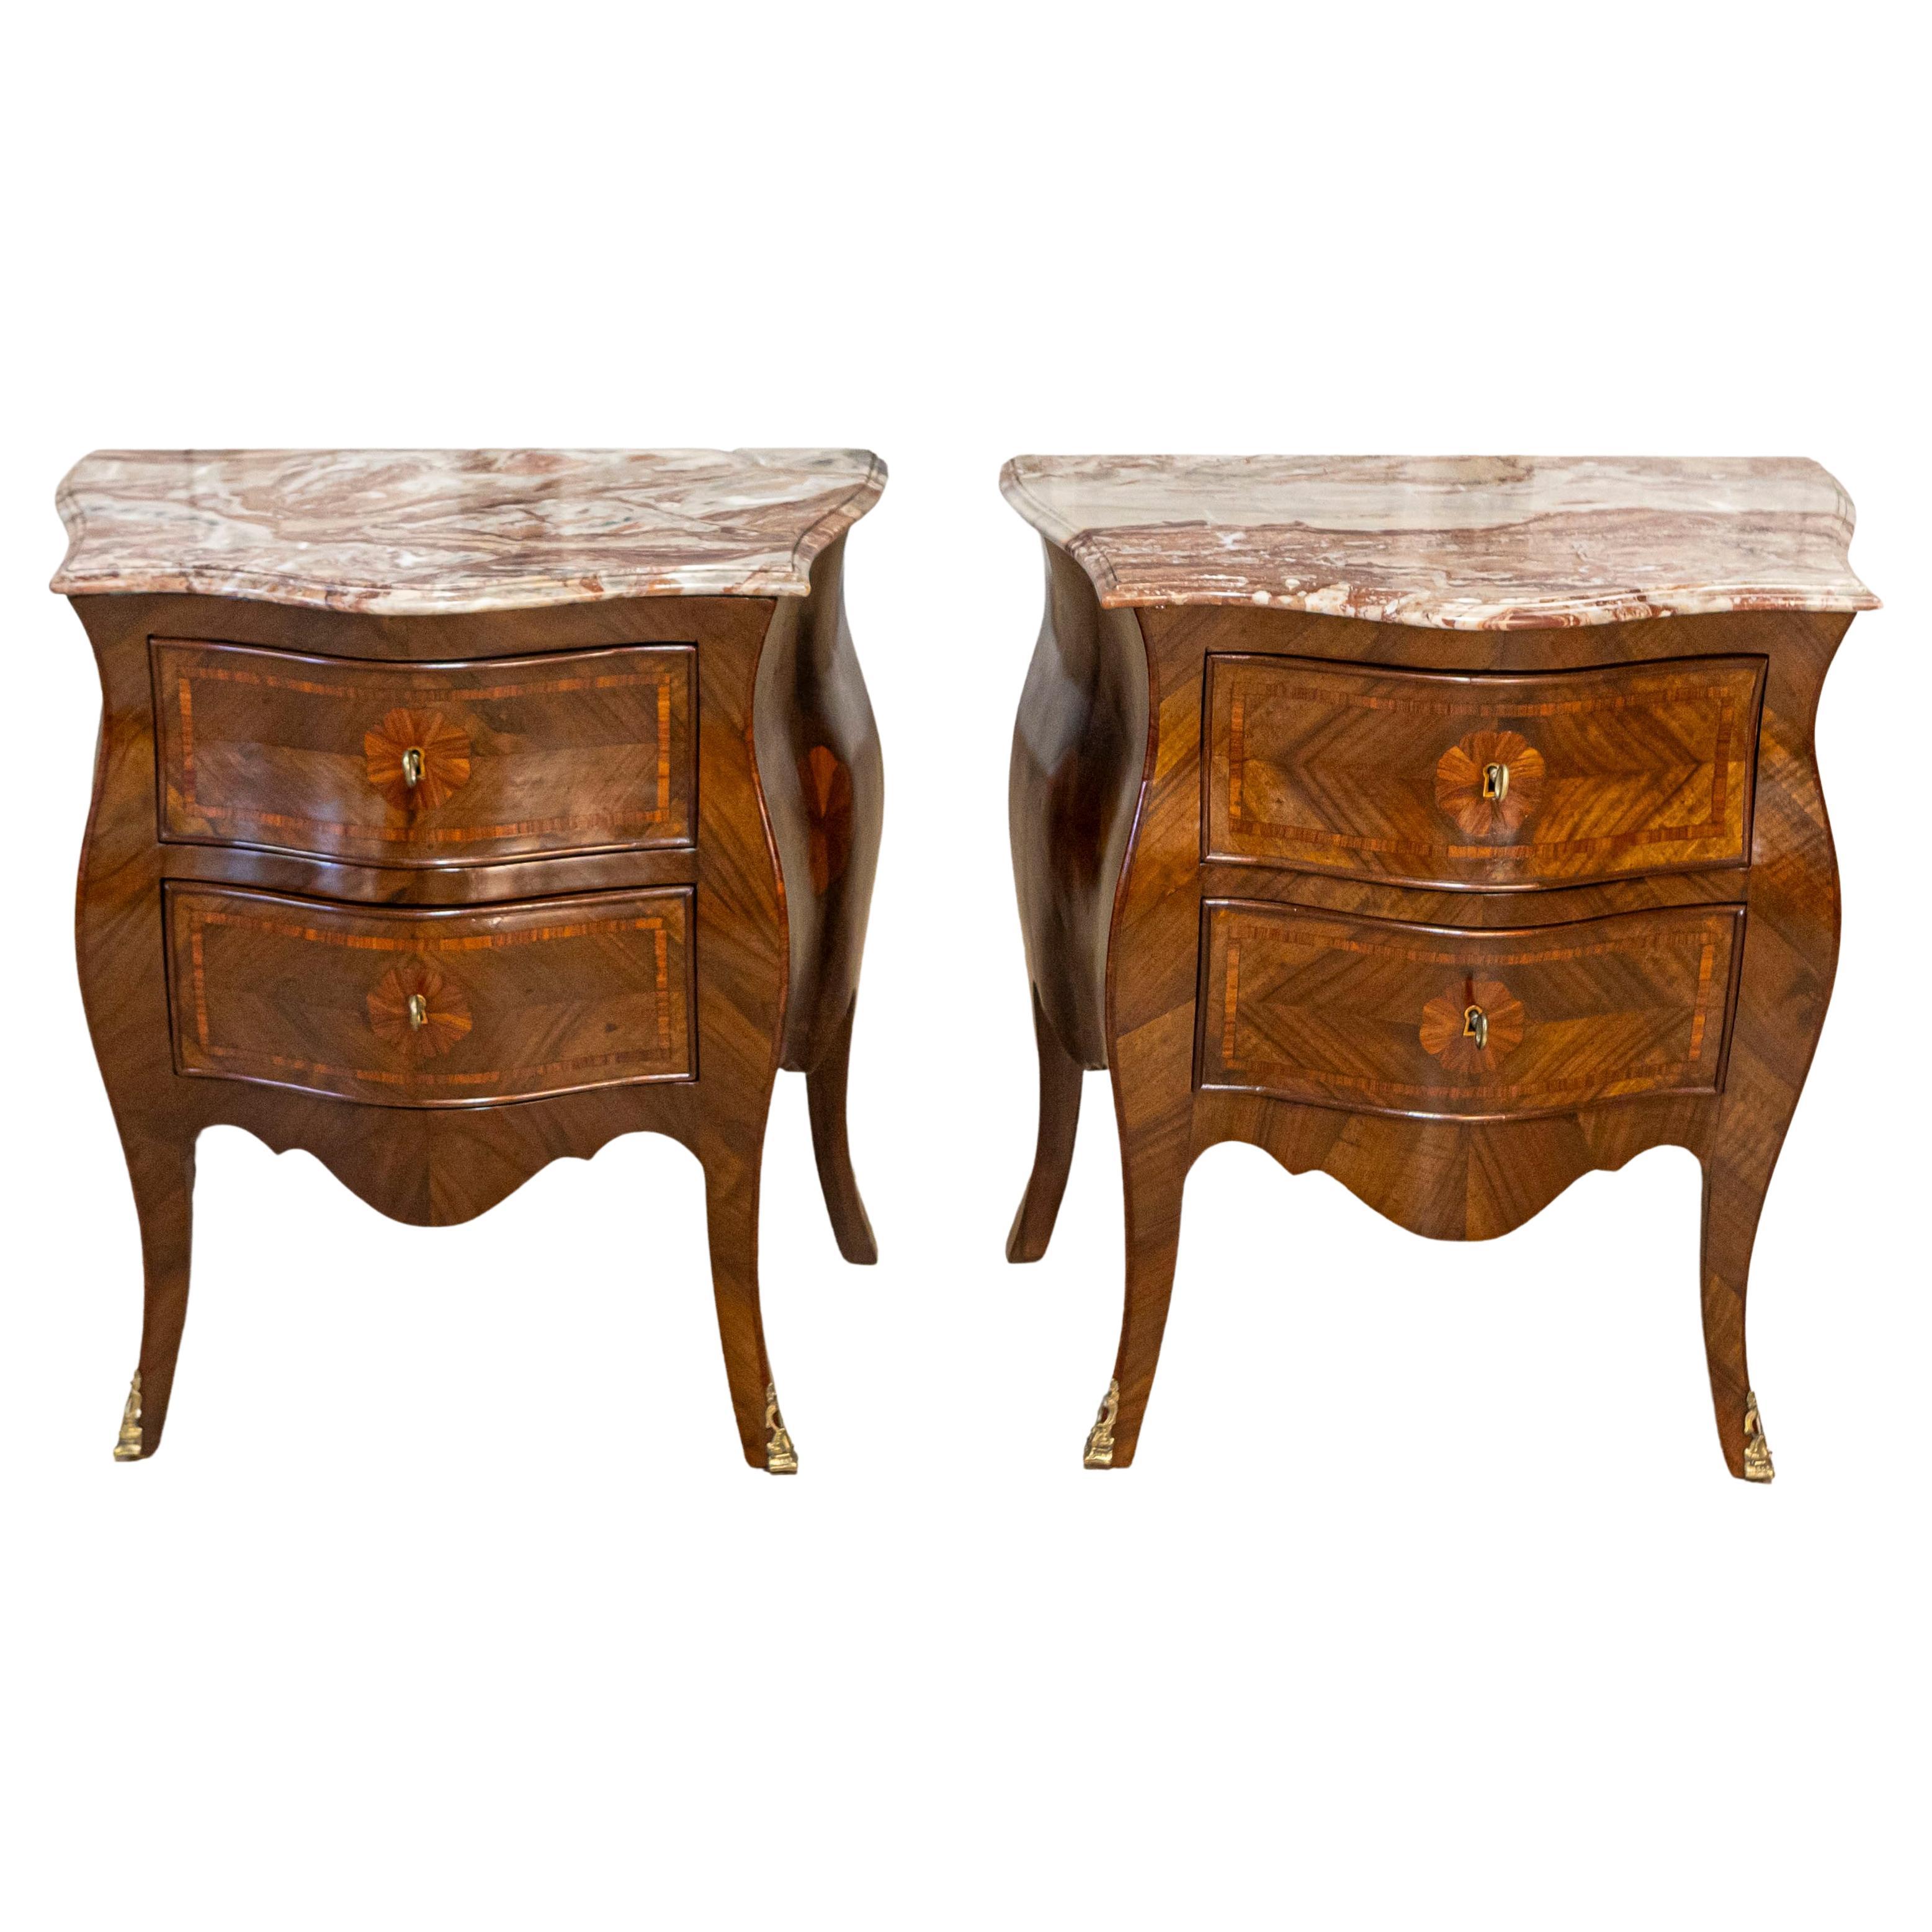 Pair of Italian Rococo Style 1900s Bombé Walnut Nightstands with Marquetry